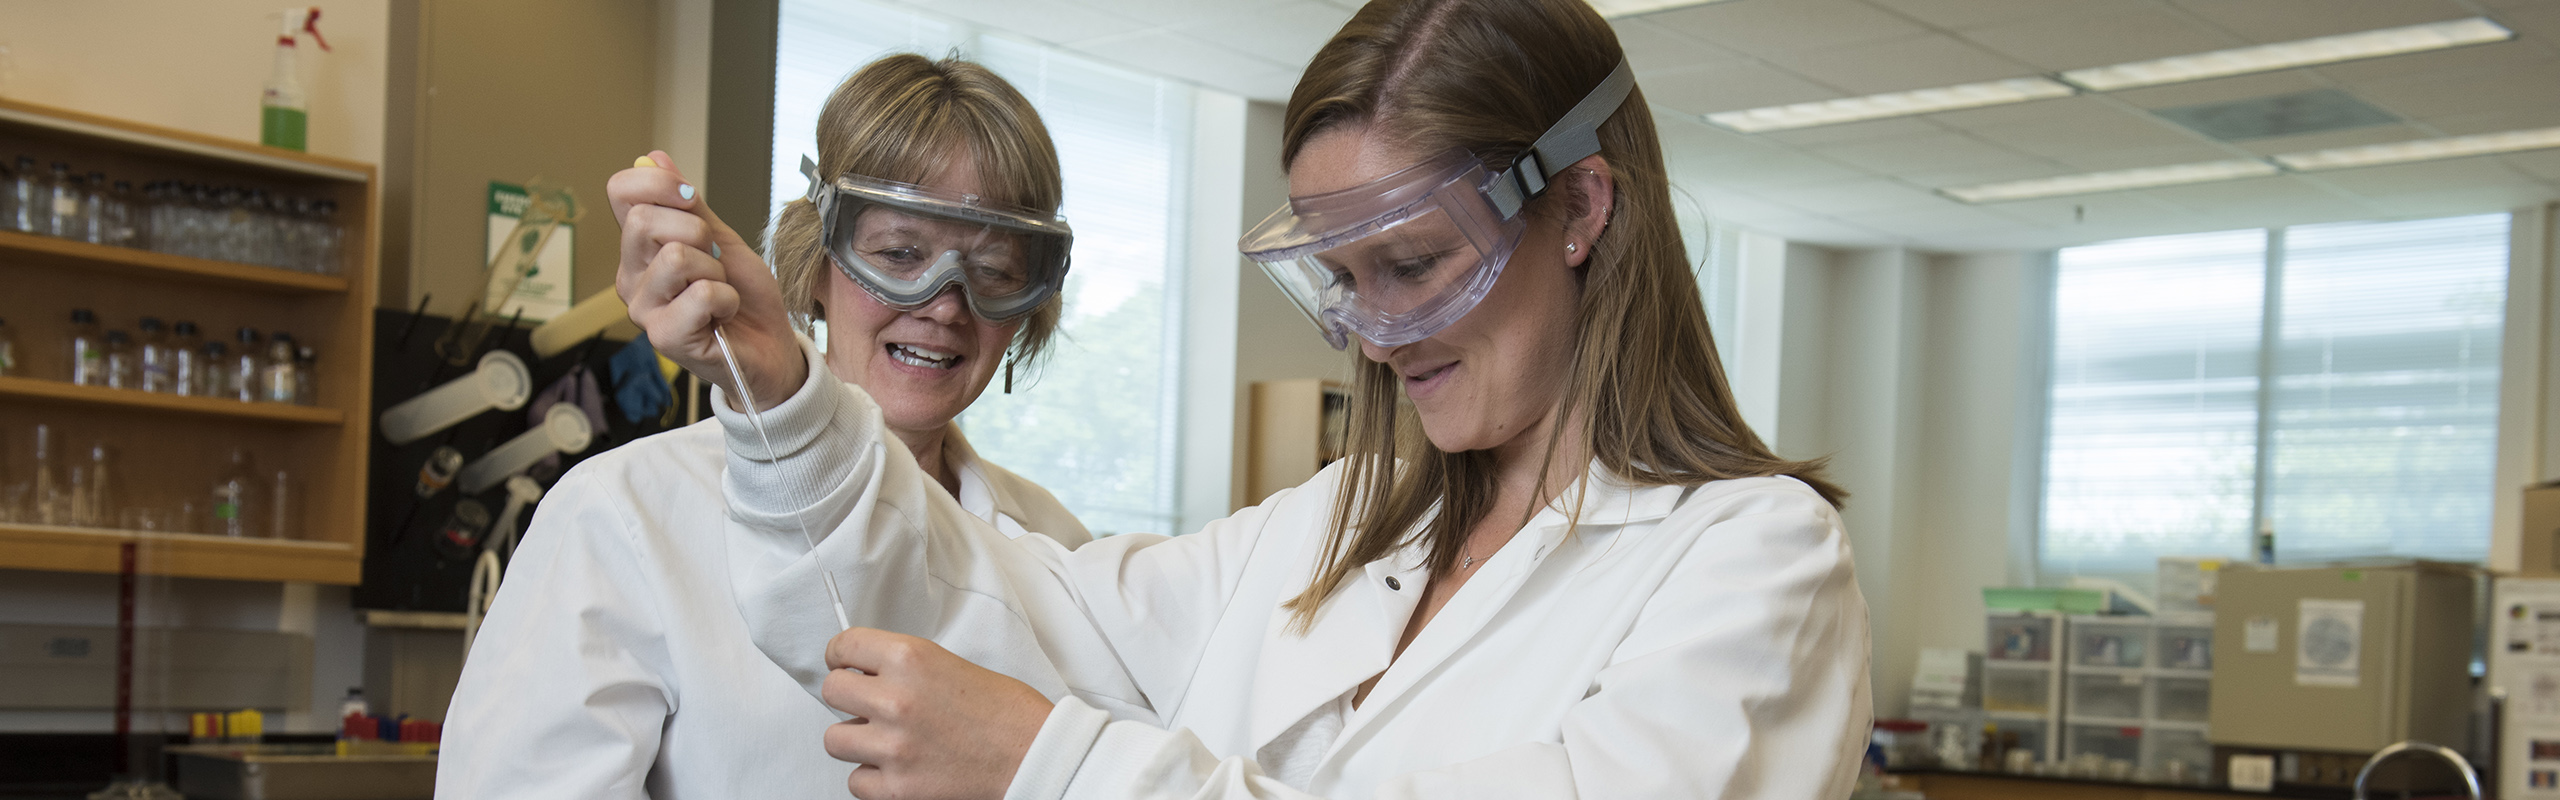 Biochemistry major and Honors Fellow Taylor Glenn '16 poses in a laboratory with associate professor of chemistry Kathy Matera, her research mentor.